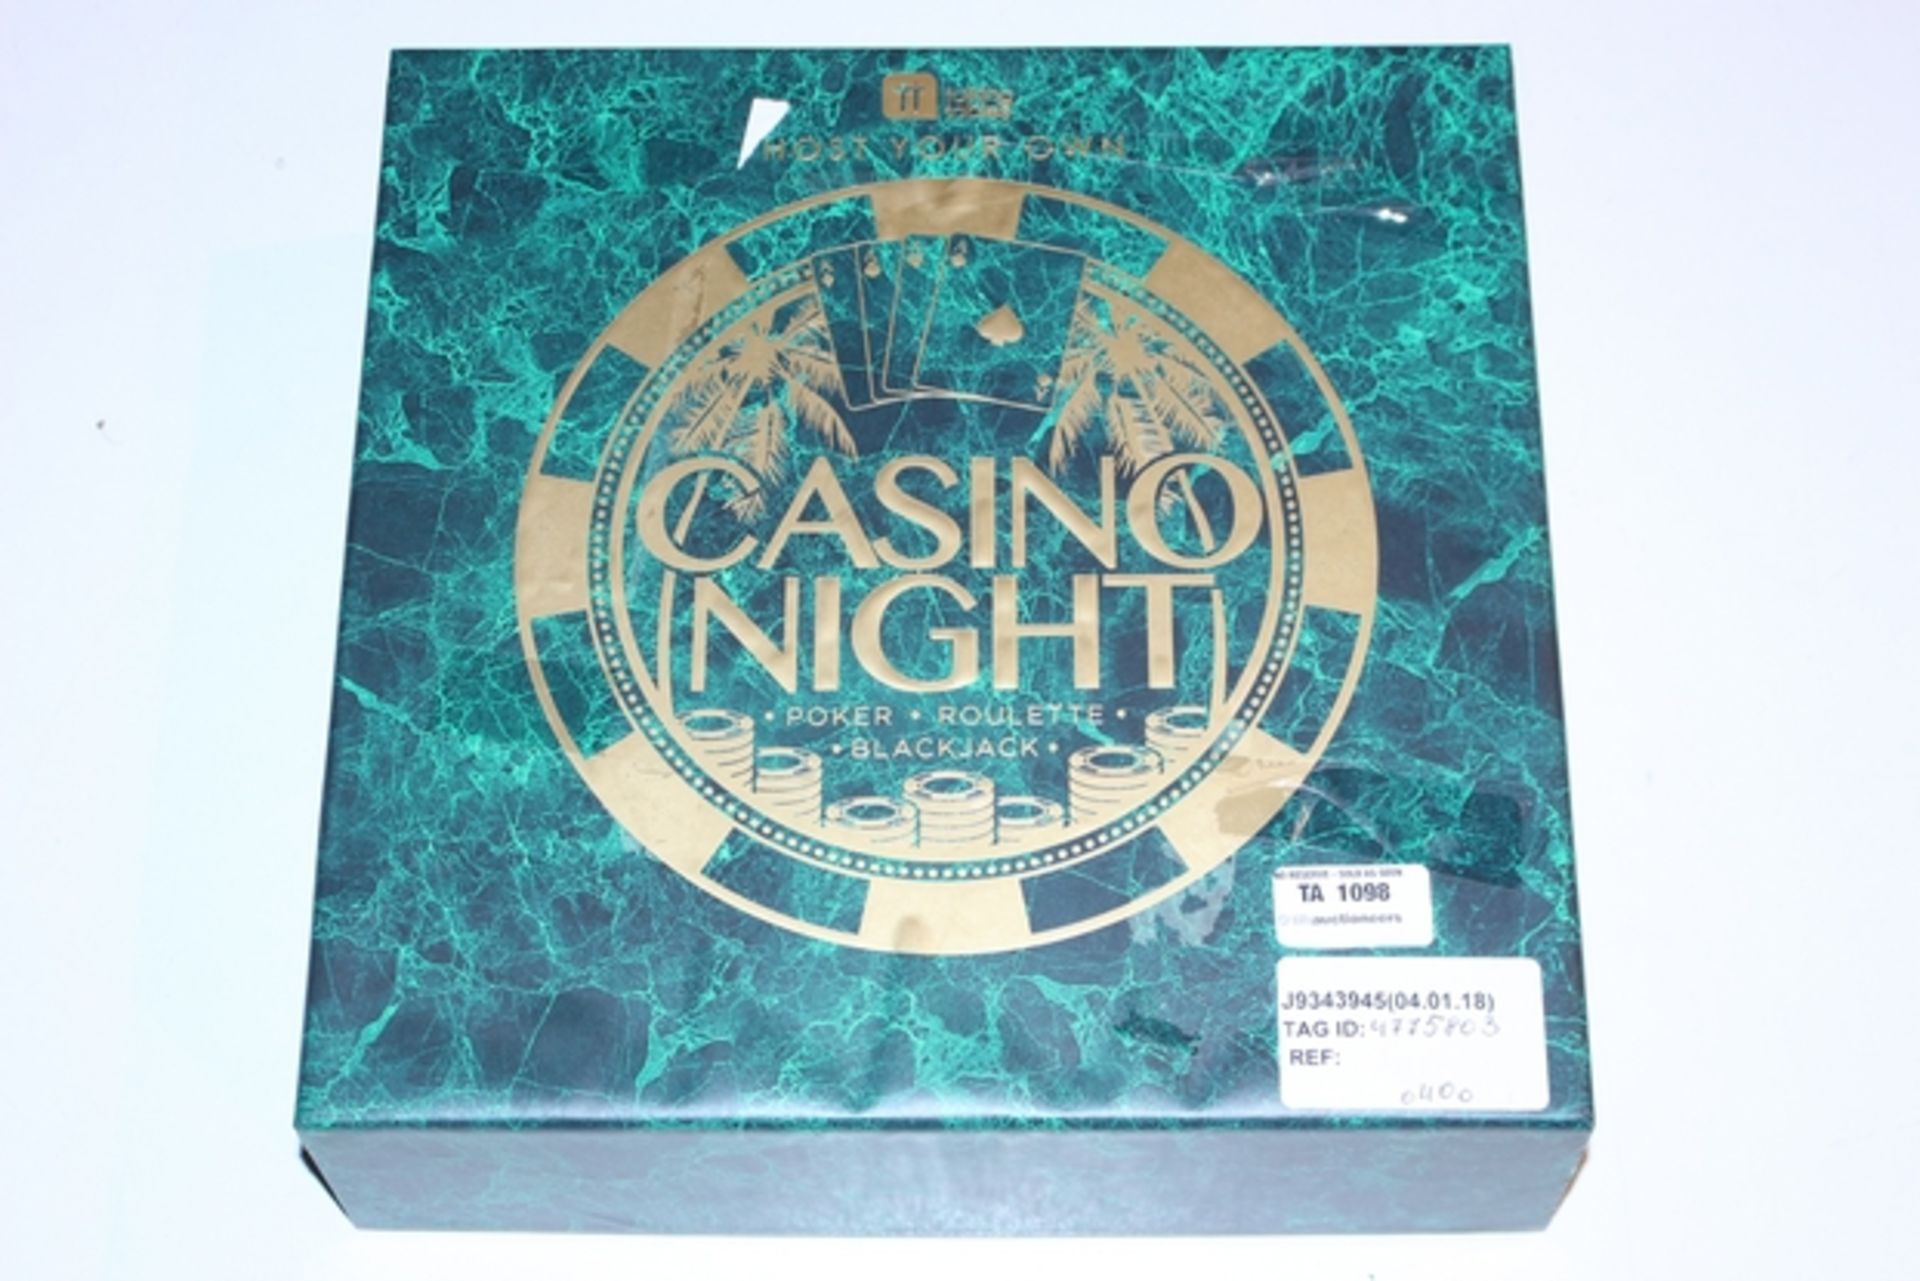 1X HOST YOUR OWN CASINO NIGHT RRP £40 (JL-9343945) (04/01/18) (4775803)